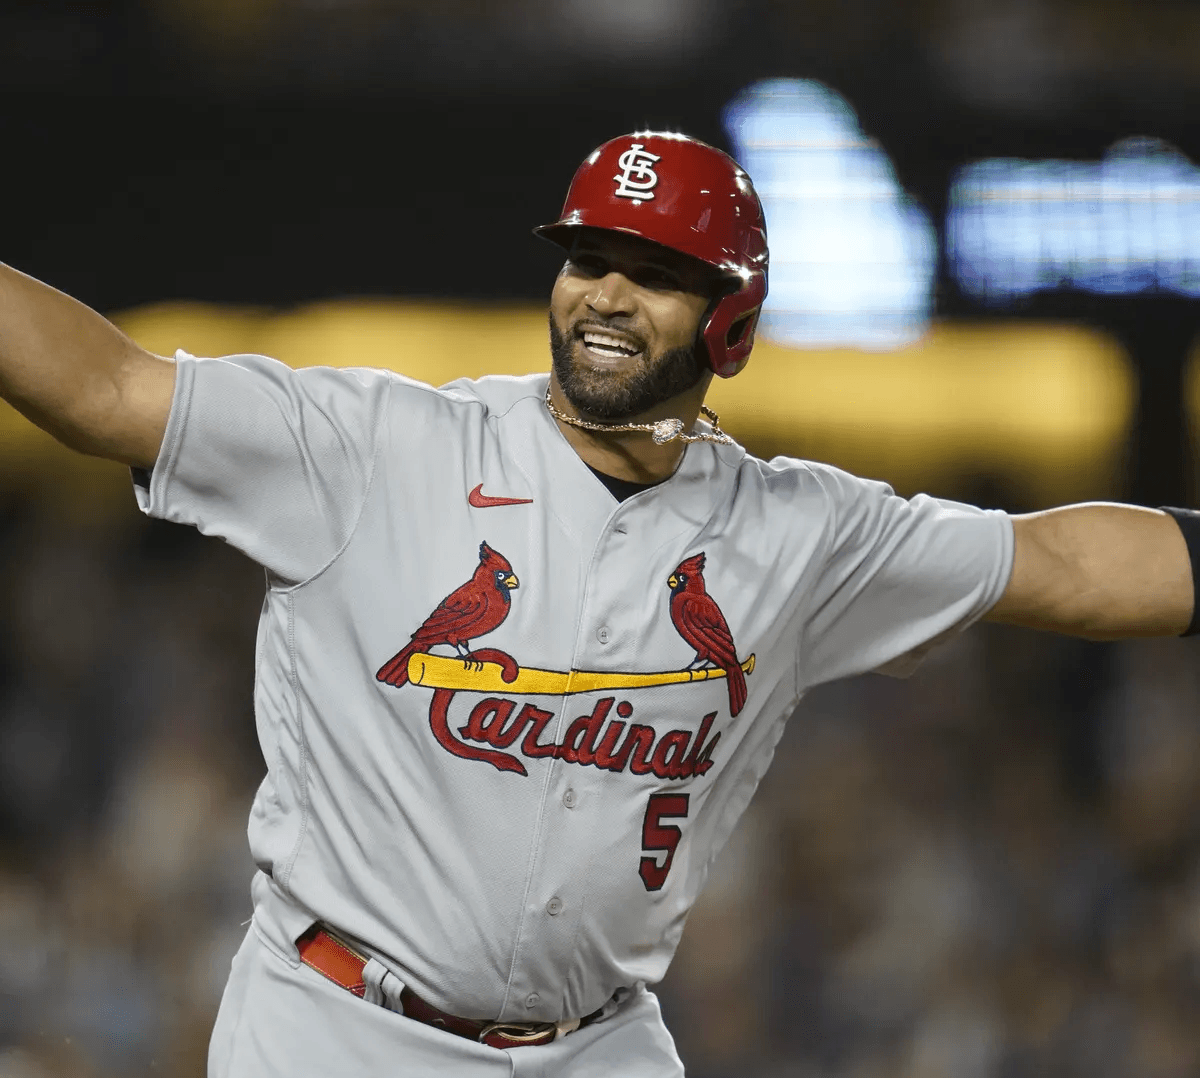 Albert Pujols Rookie Card Countdown and Ranking His Most Valuable RCs